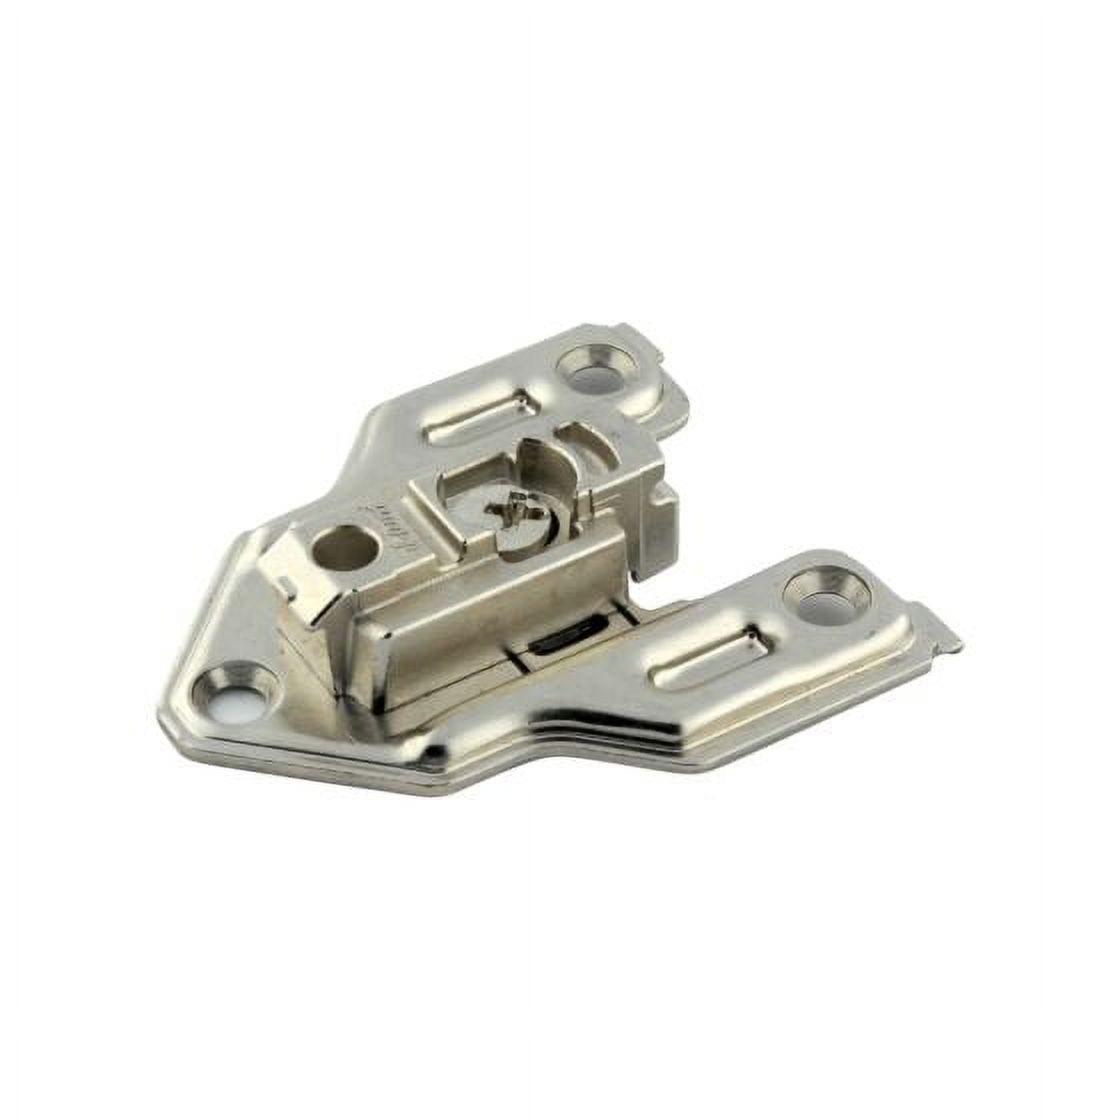 Blum 50-Pack Cam Adjustable Clip Face Frame Screw-on 6mm Mounting Plate, Nickel Plated - image 2 of 3